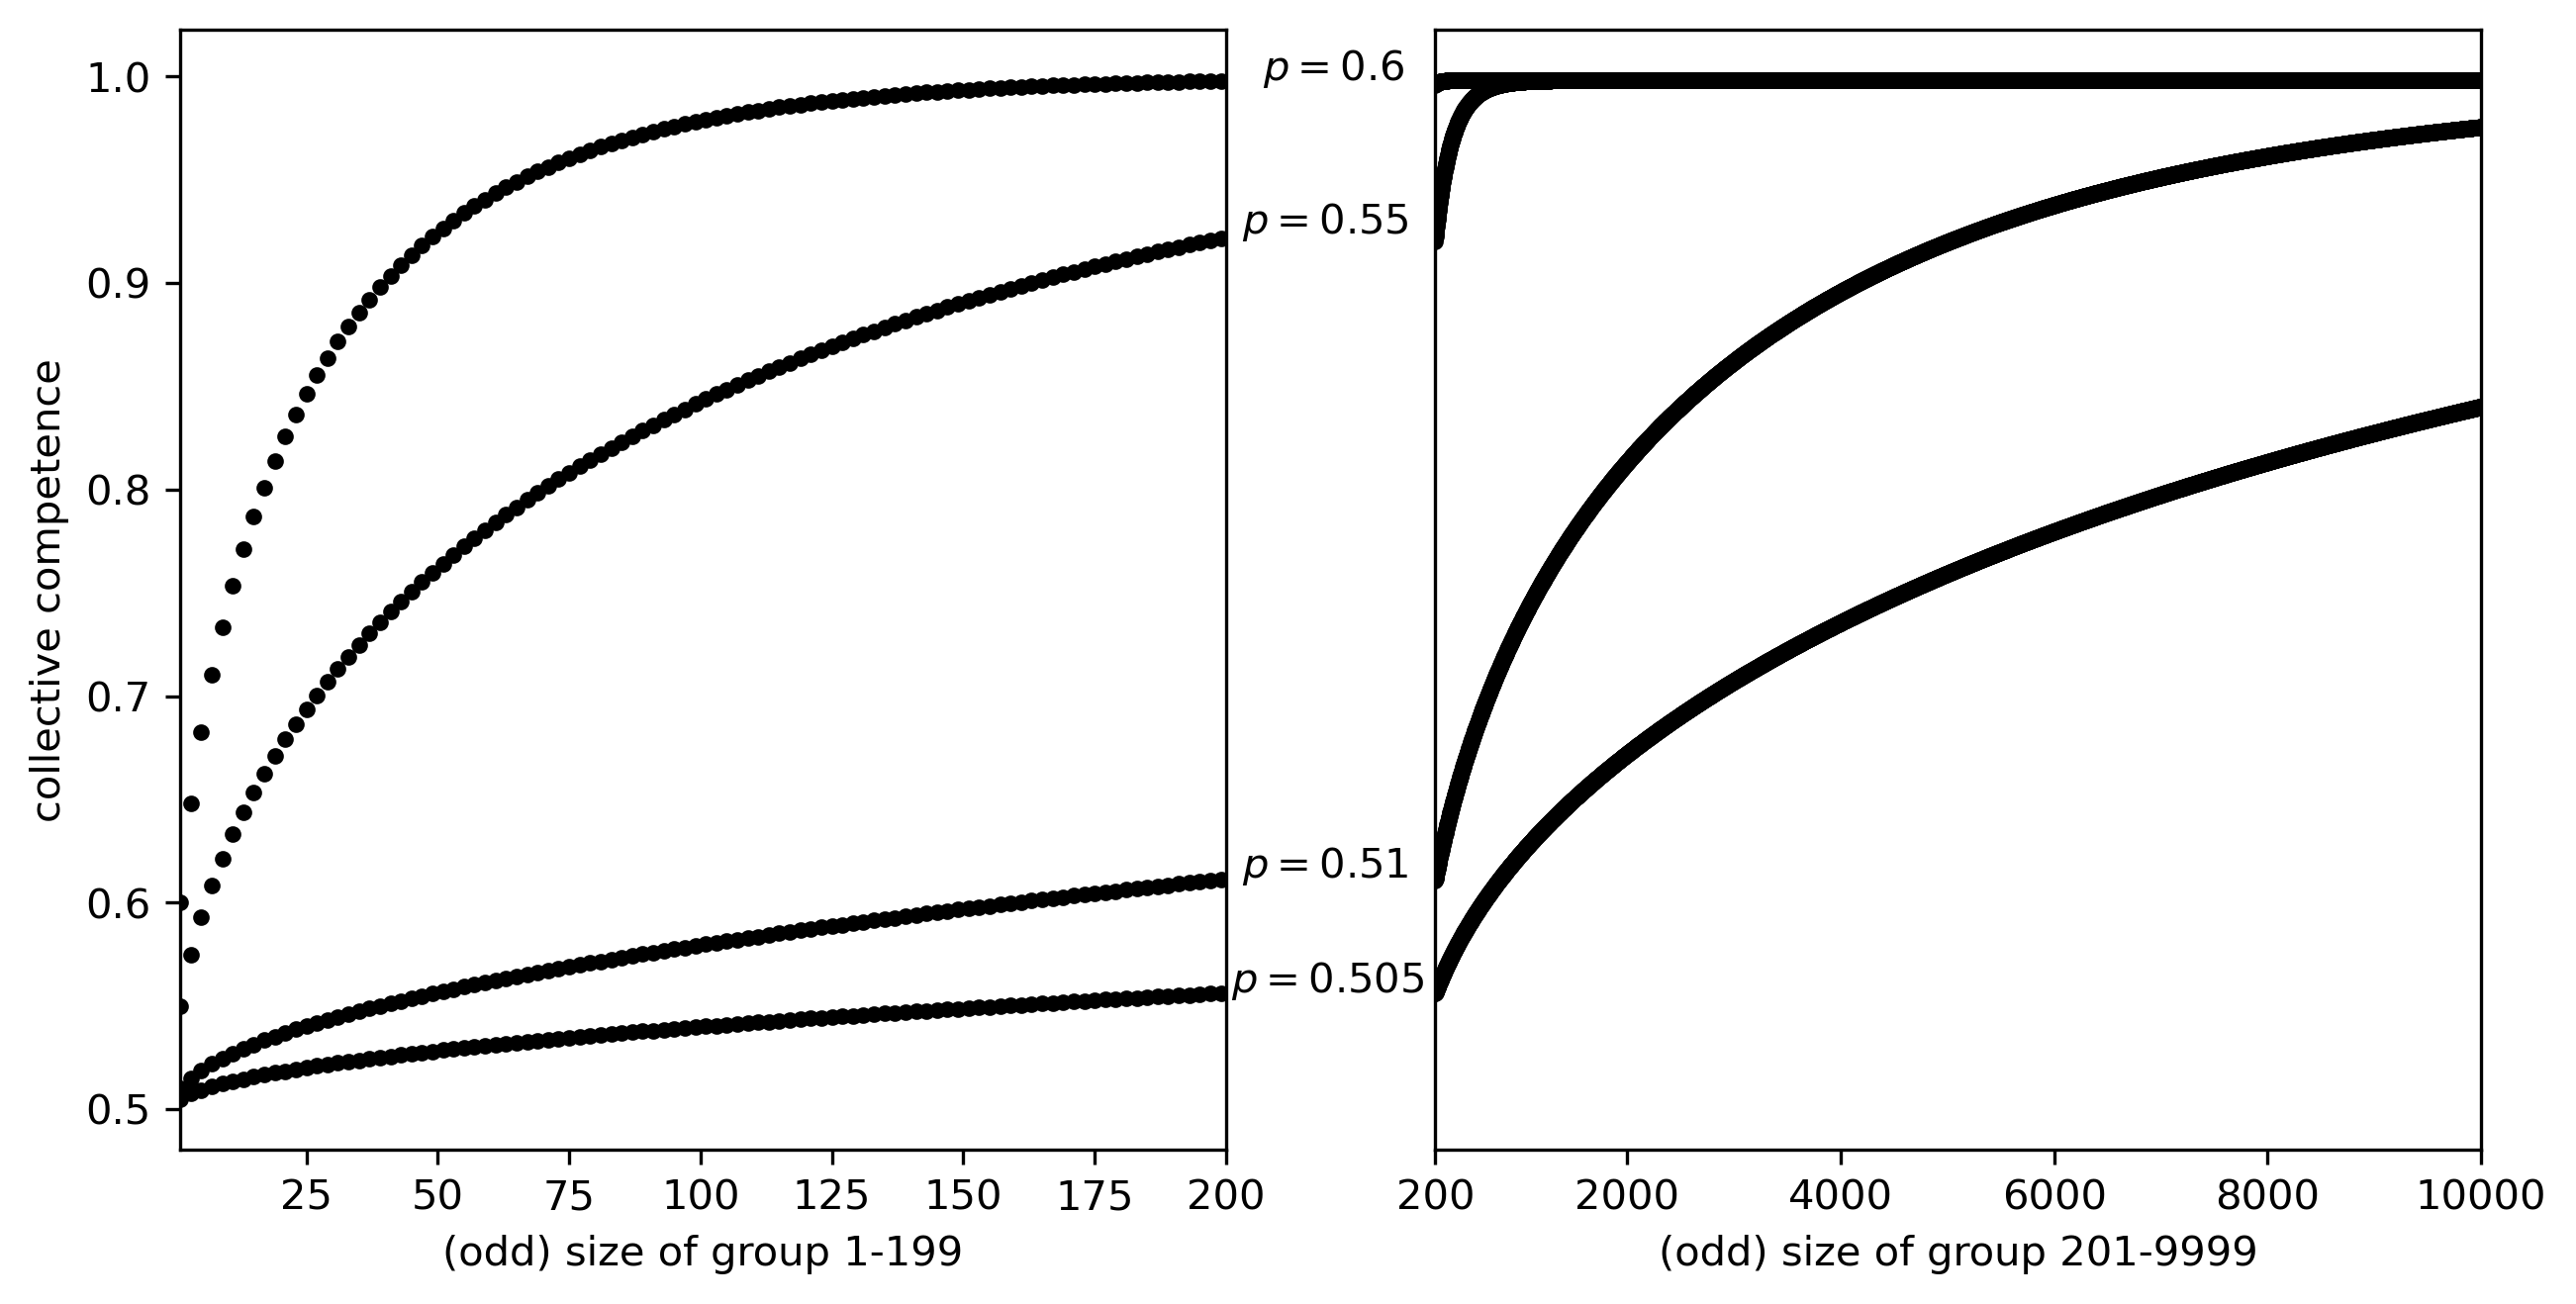 two related graphs: link to extended description below